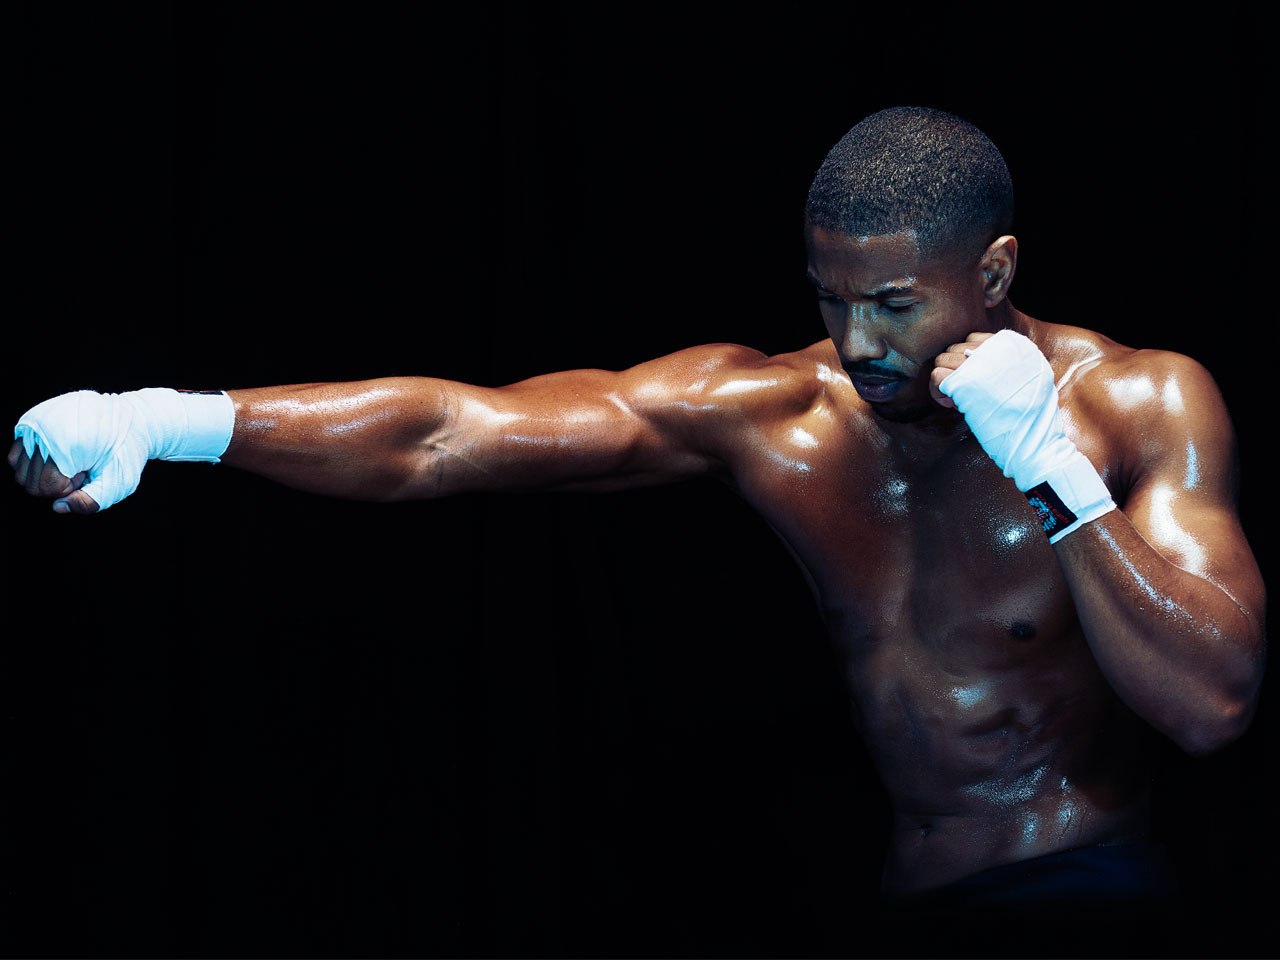 10 Men Celebrity Workouts To Inspire You in 2021 - Michael B. Jordan's 'Creed' Workout